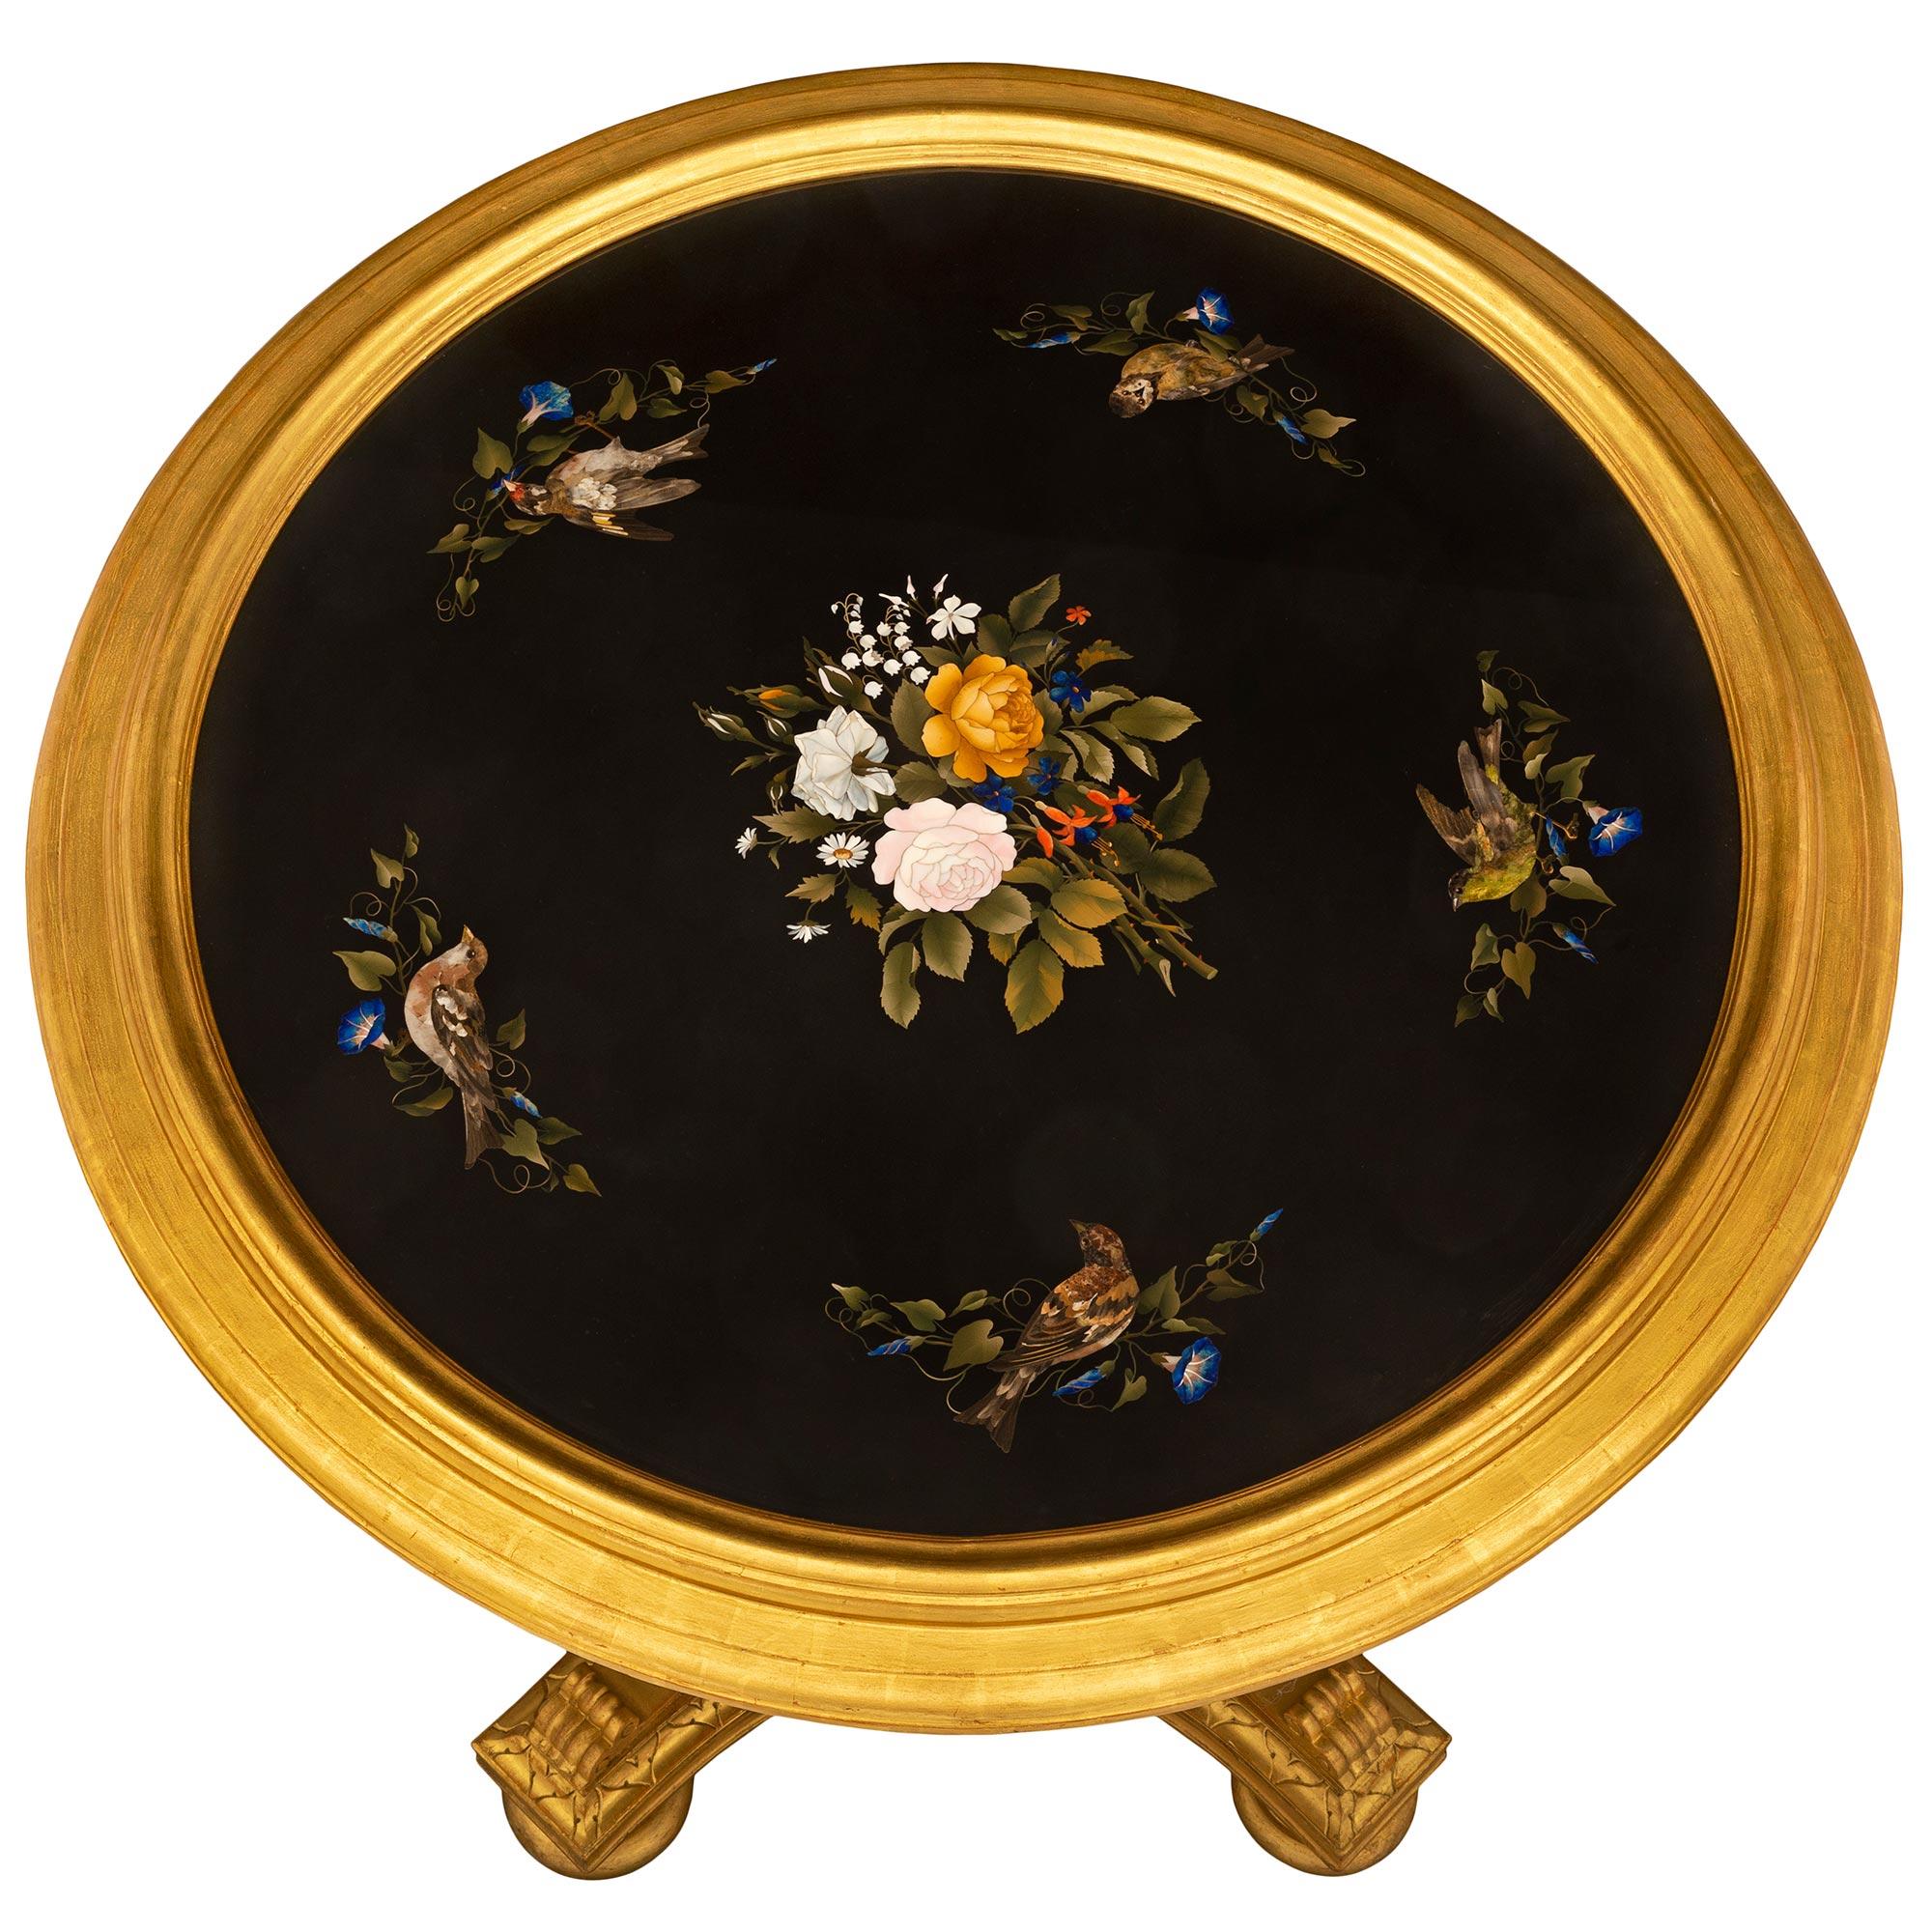 A stunning and extremely high quality Italian 19th century Florentine st. giltwood and pietra dura center table/side table. The circular table is raised by a beautiful square base with concave sides and cut corners with fine mottled bun feet and